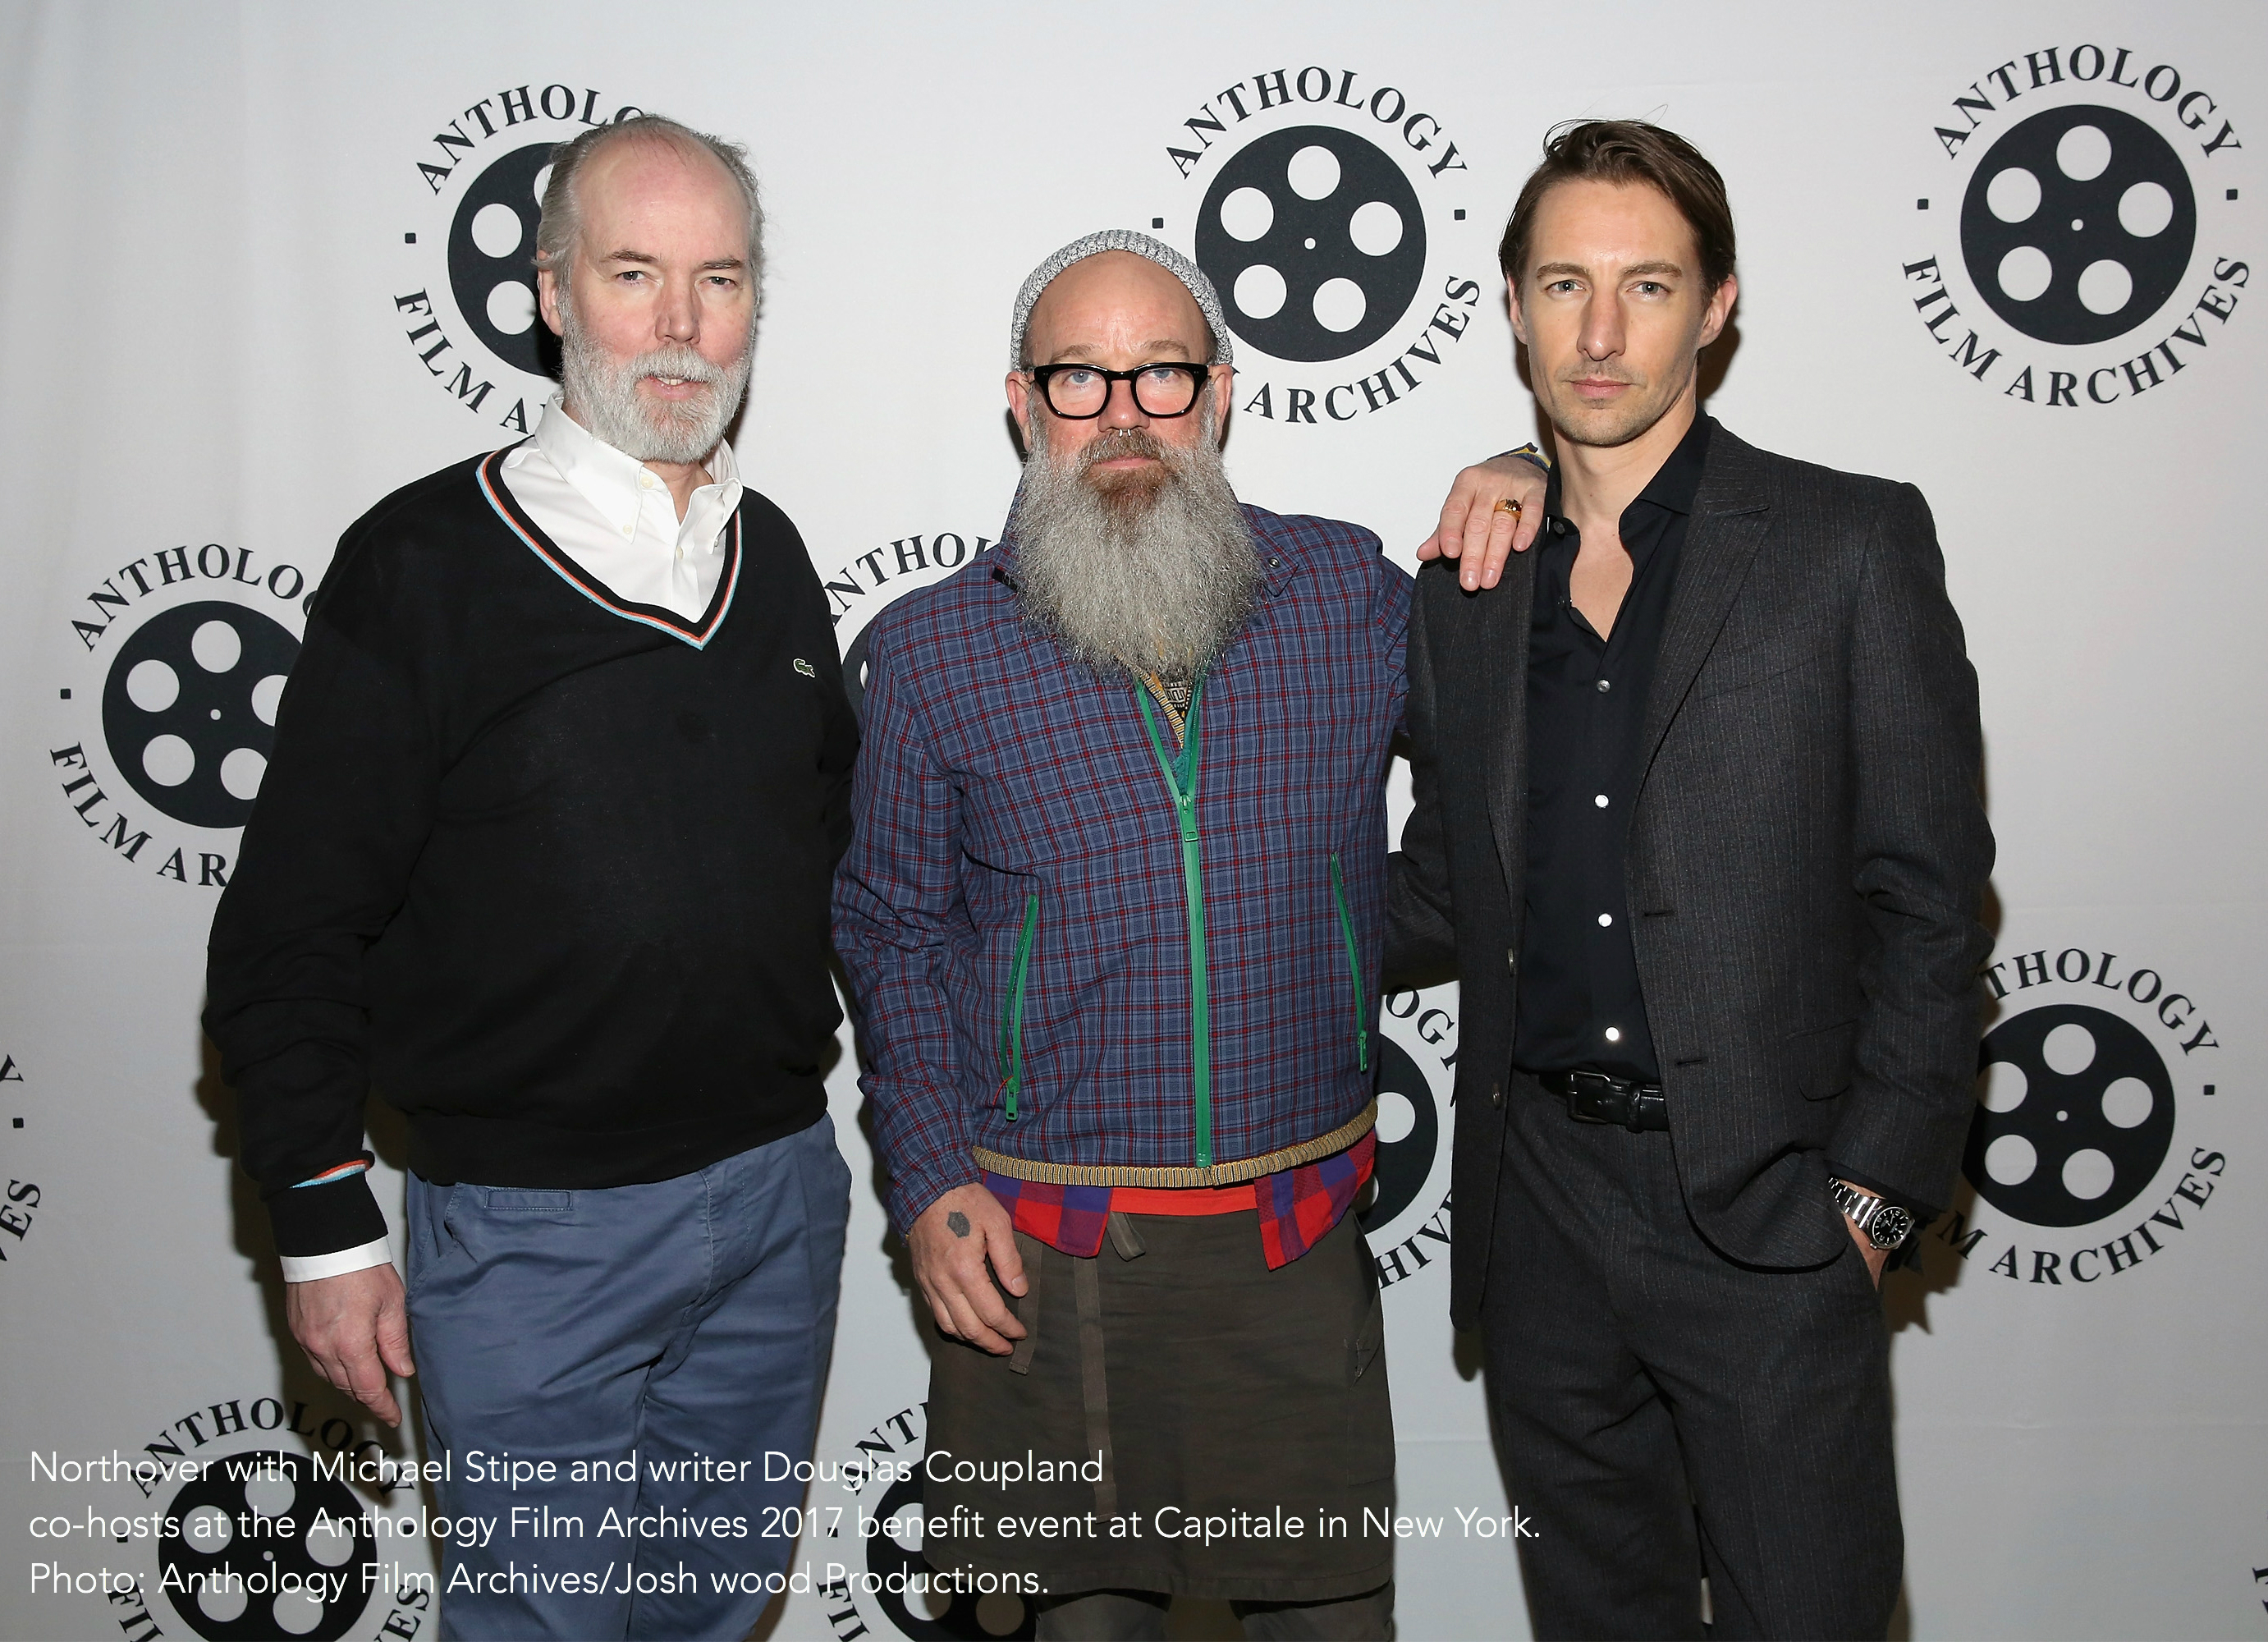 Northover with Michael Stipe and writer Douglas Coupland co-hosts at the Anthology Film Archives 2017 benefit event at Capitale in New York. Photo: Anthology Film Archives/Josh wood Productions.